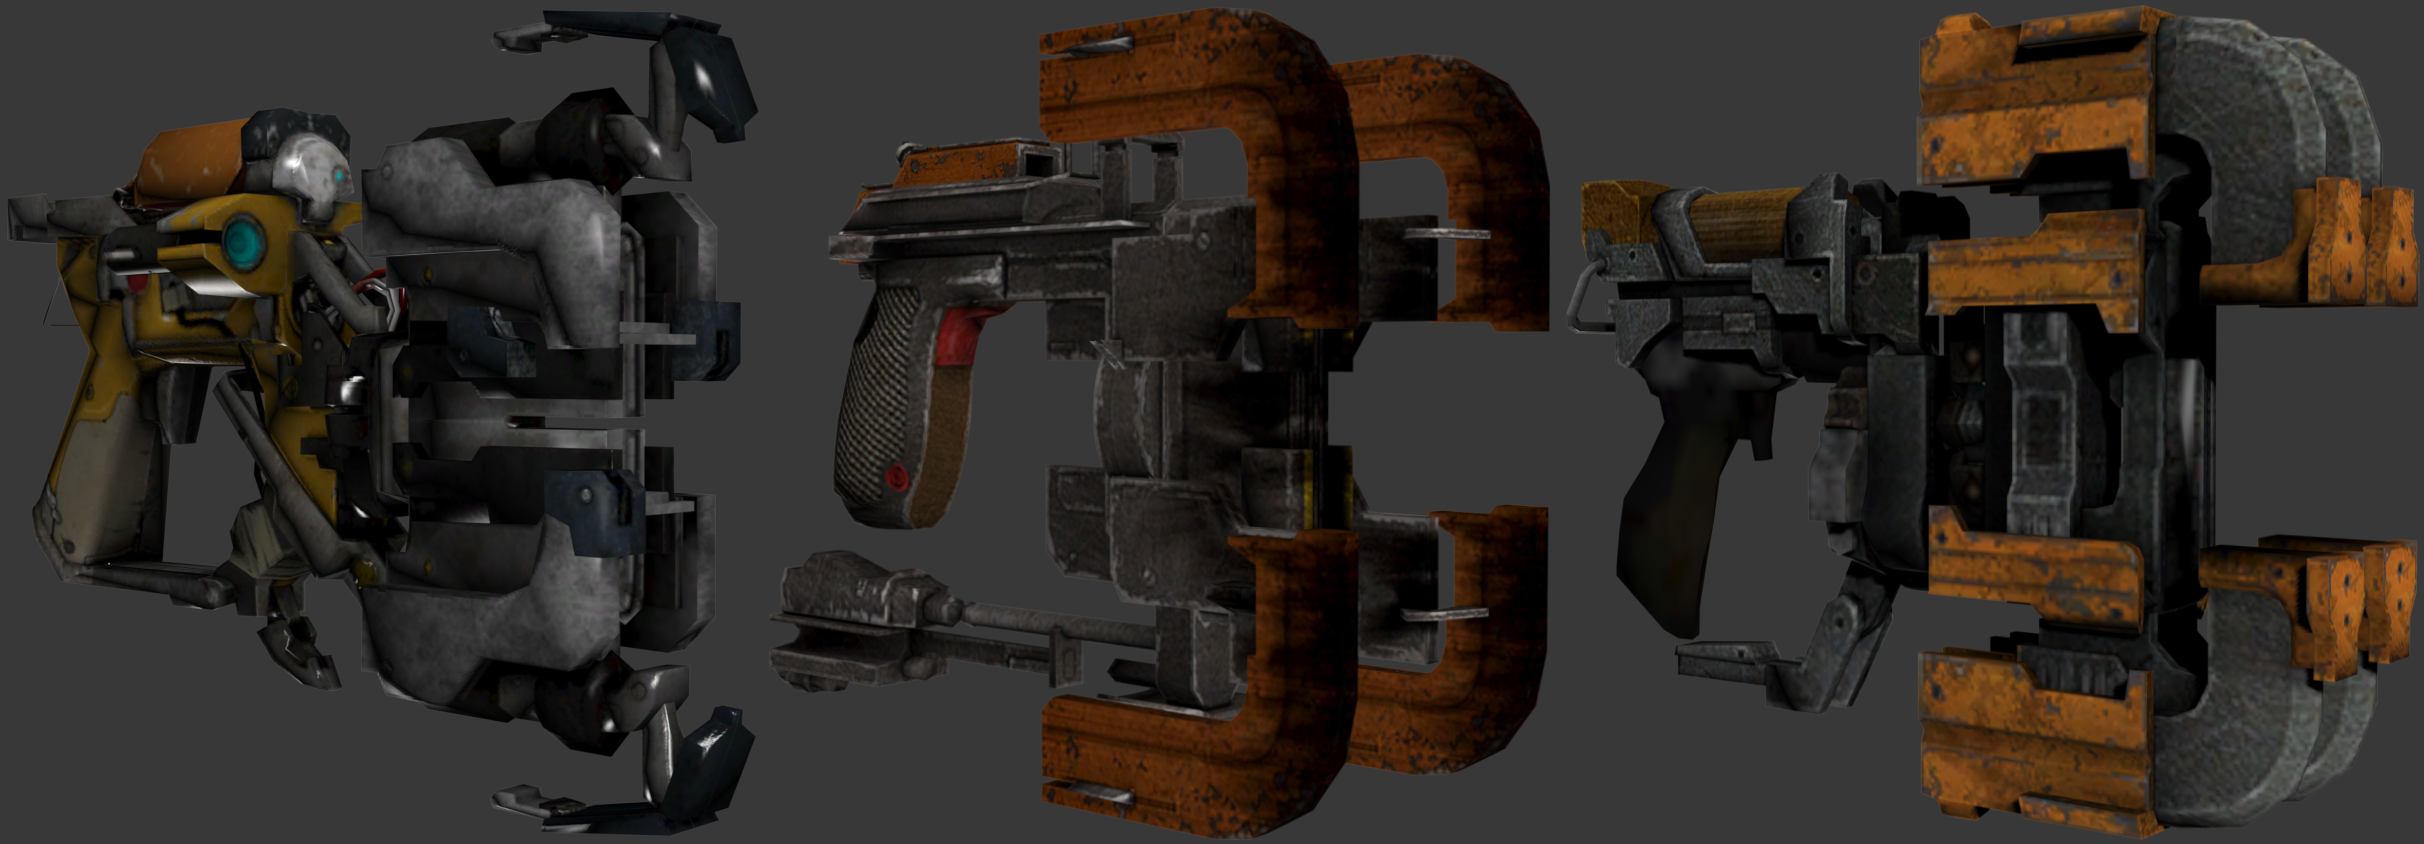 gmod dead space weapons